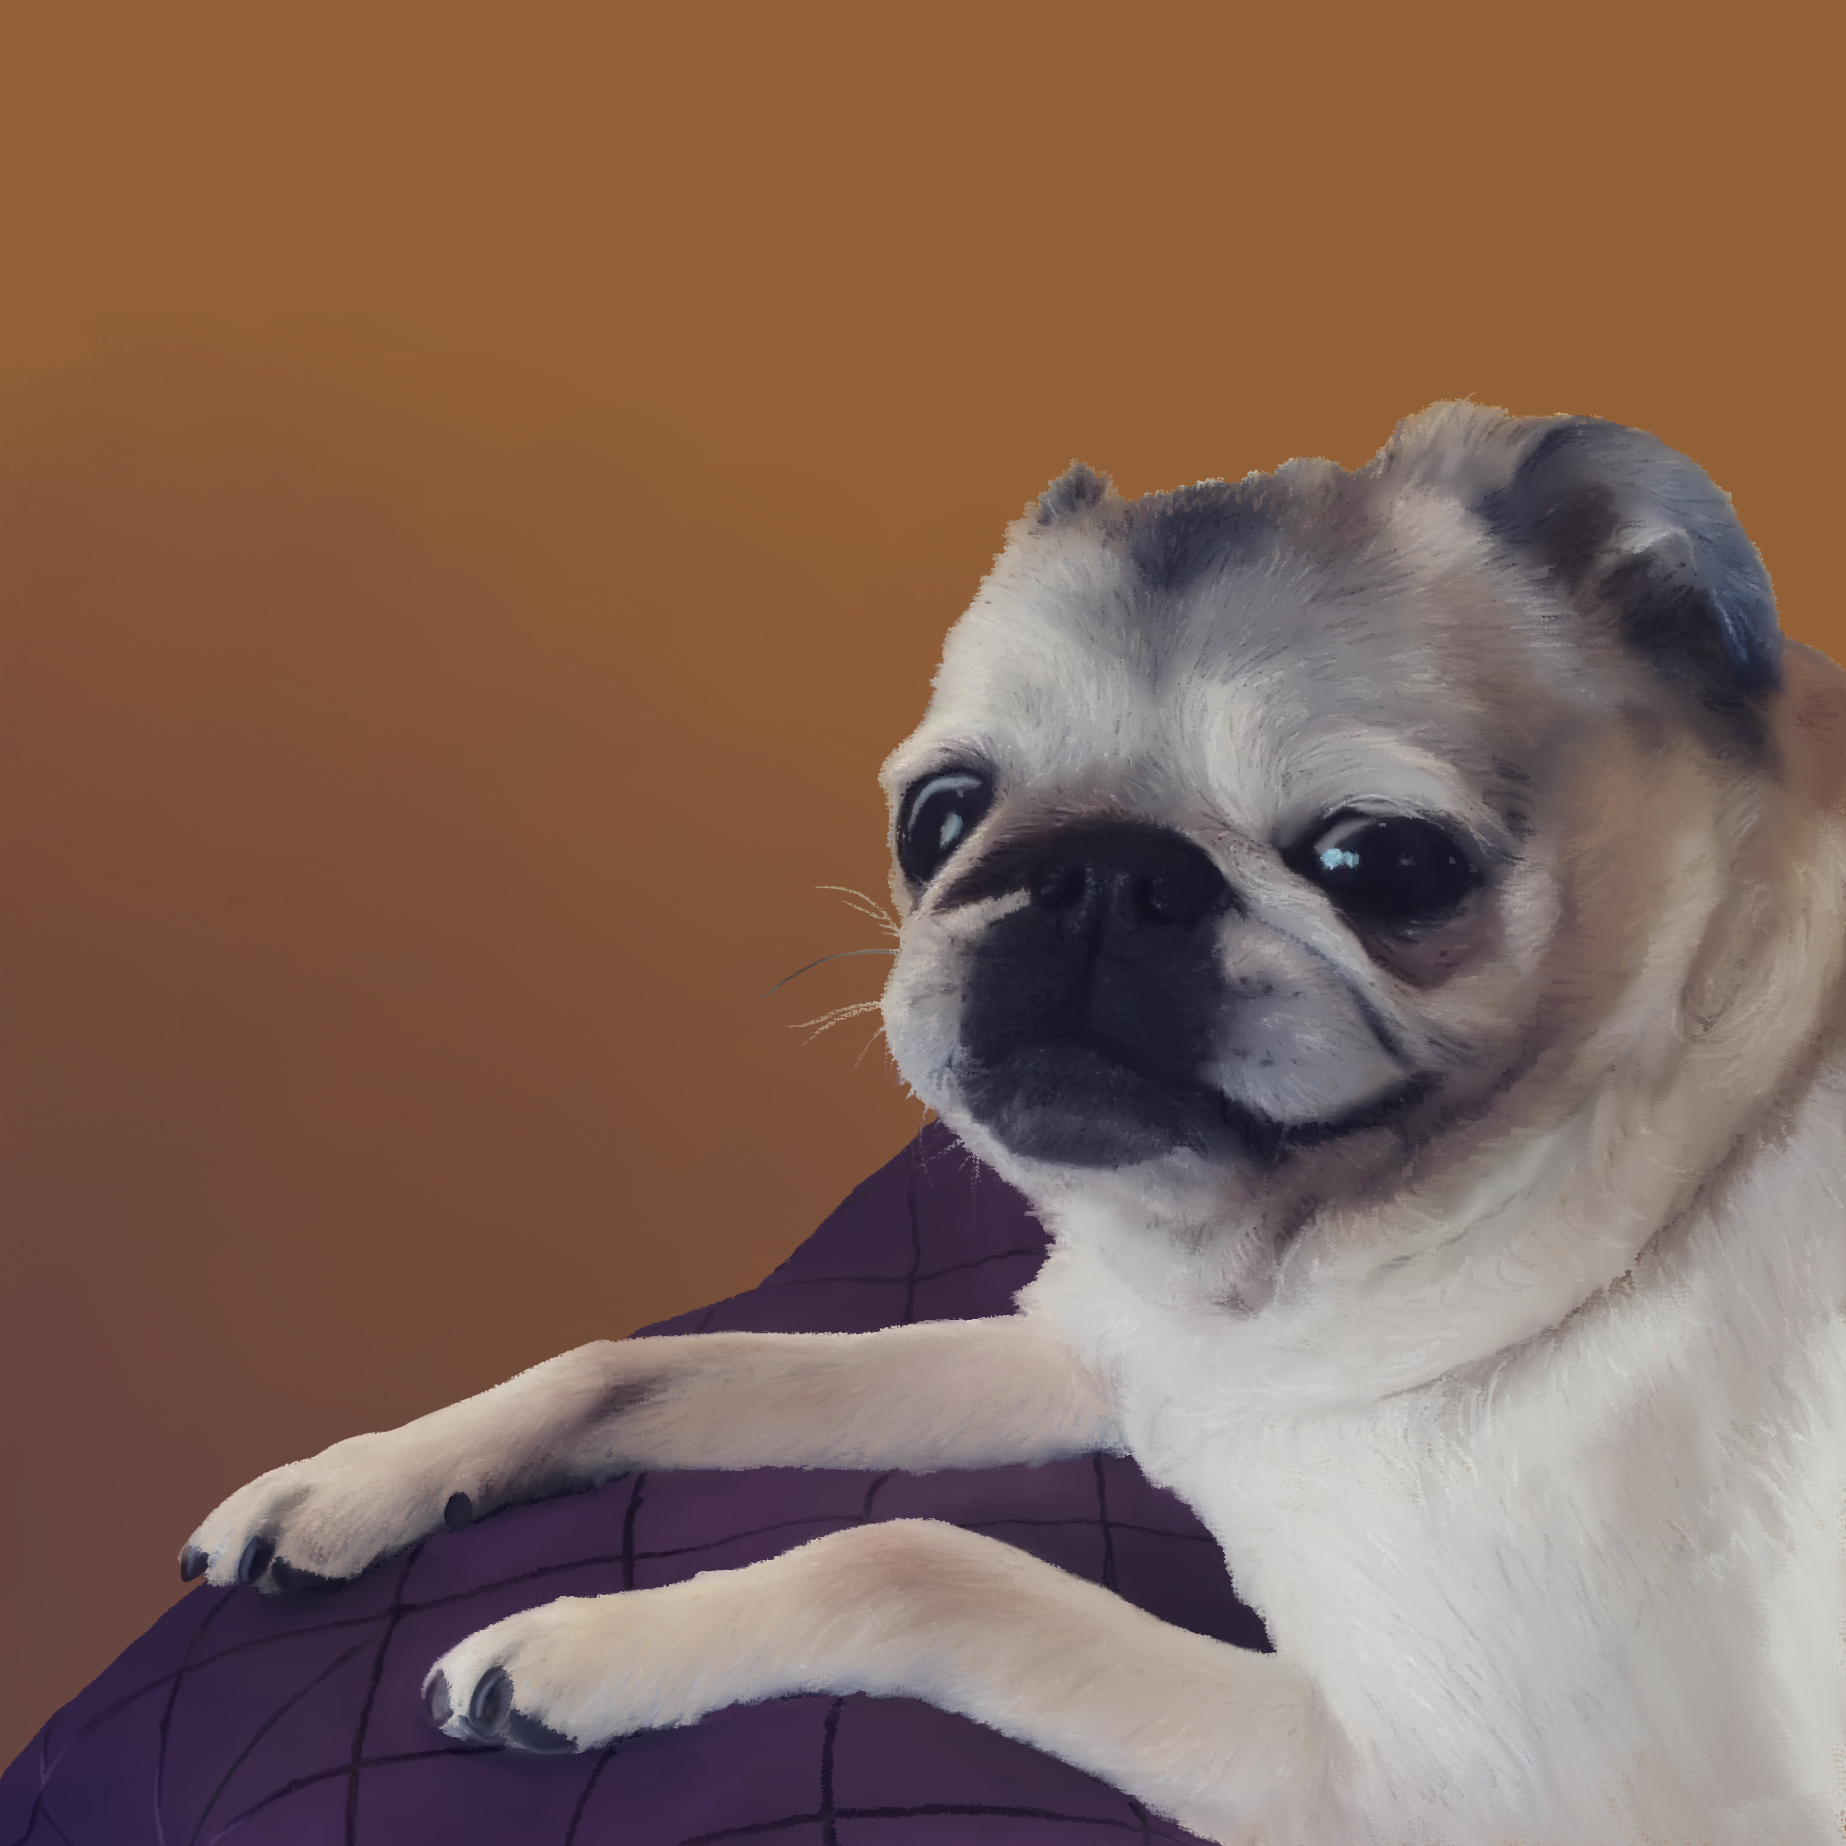 Digital painting of a pug on a purple pillow.